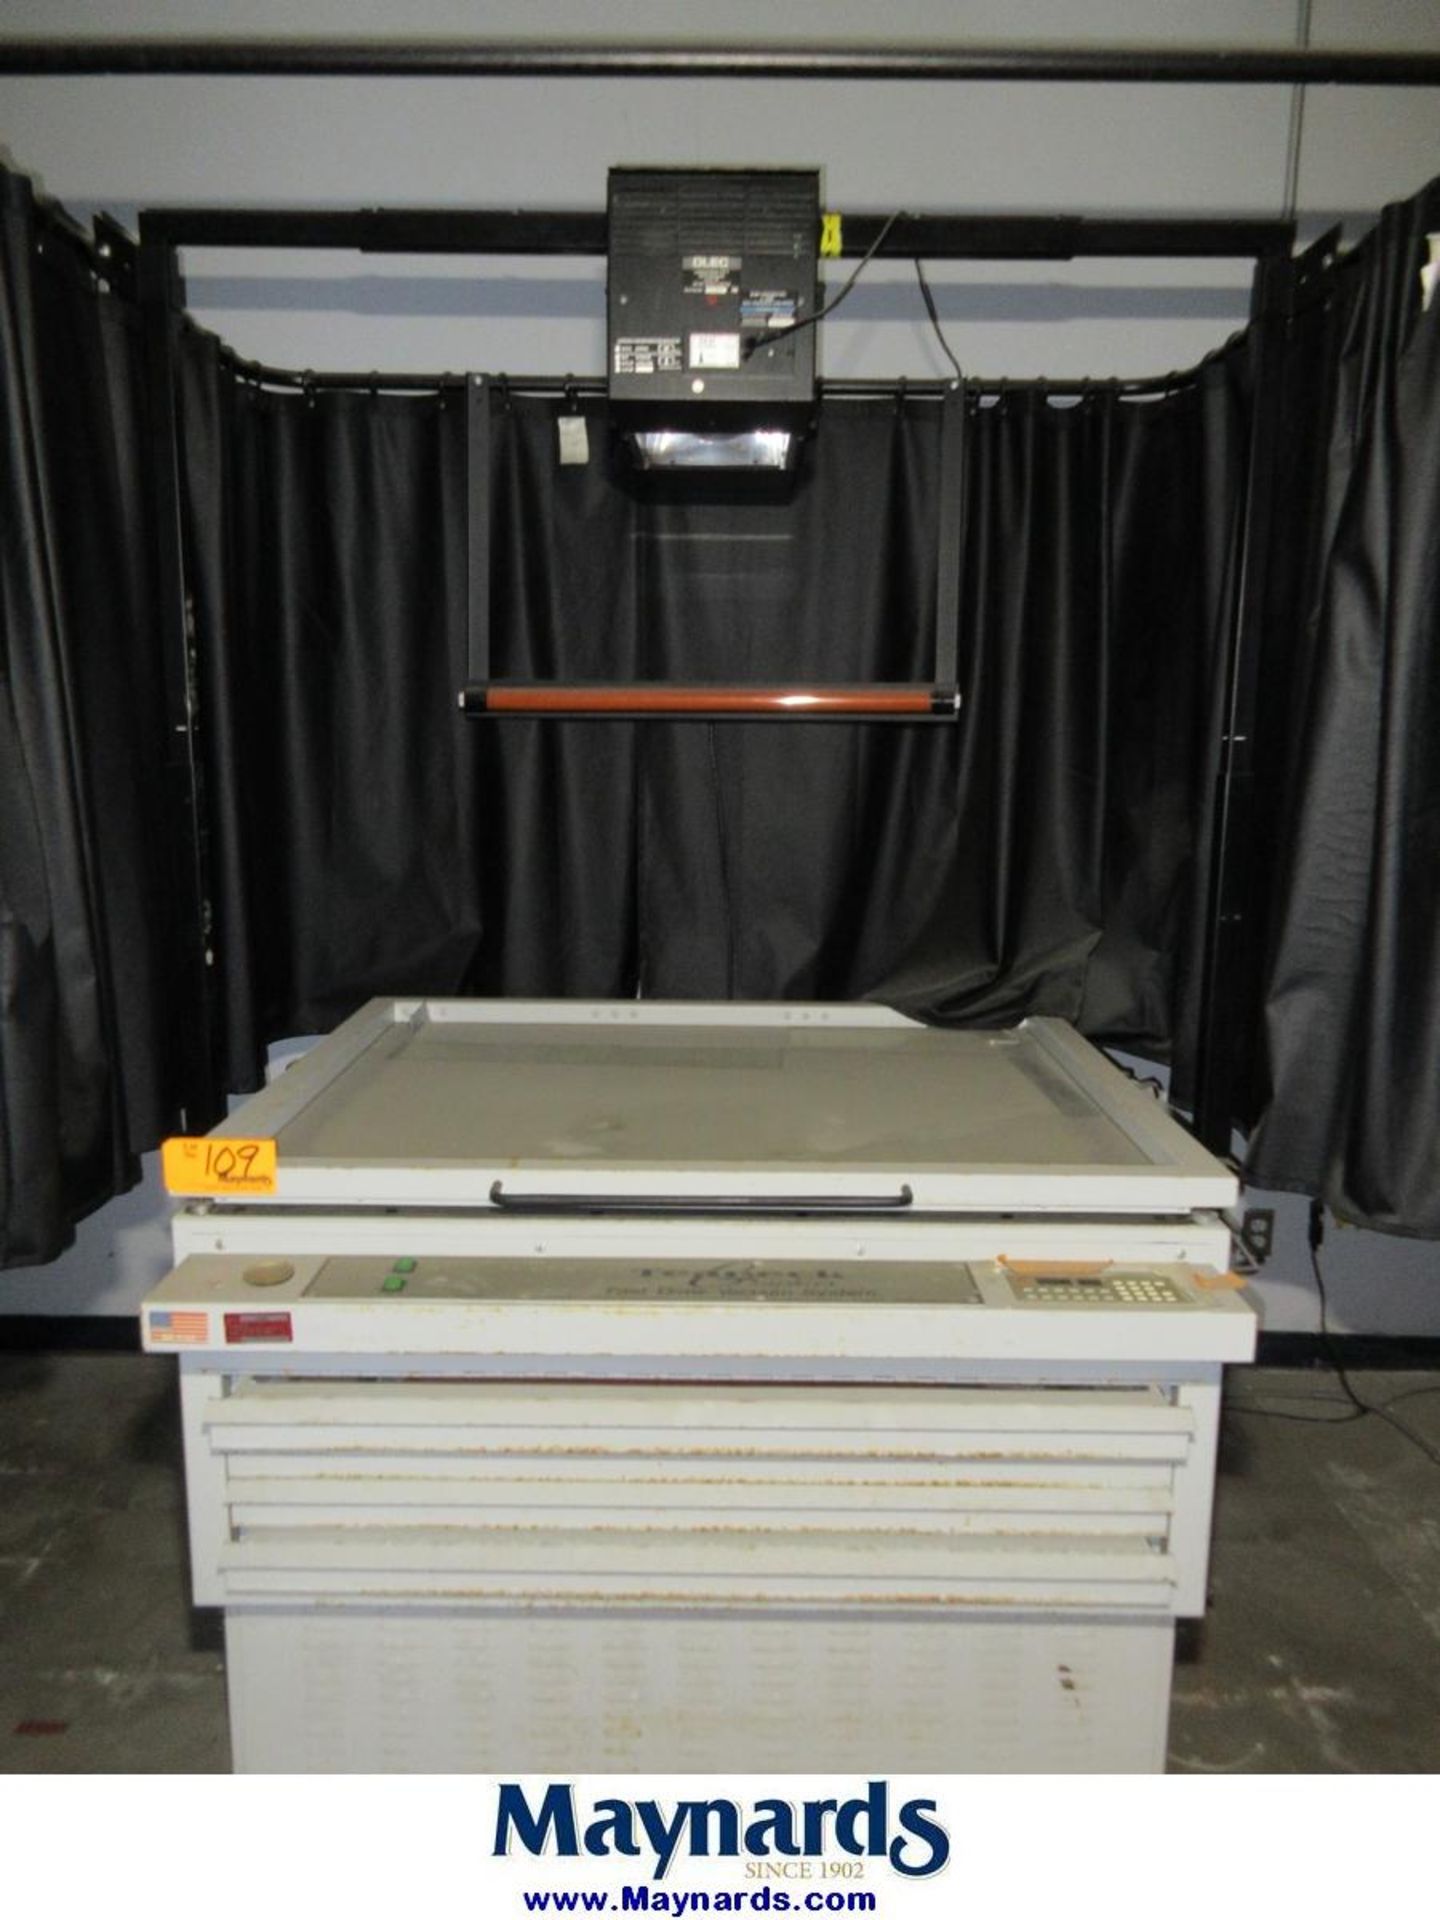 Teaneck Graphics 42"x36" Fast Draw Vacuum System - Image 2 of 9